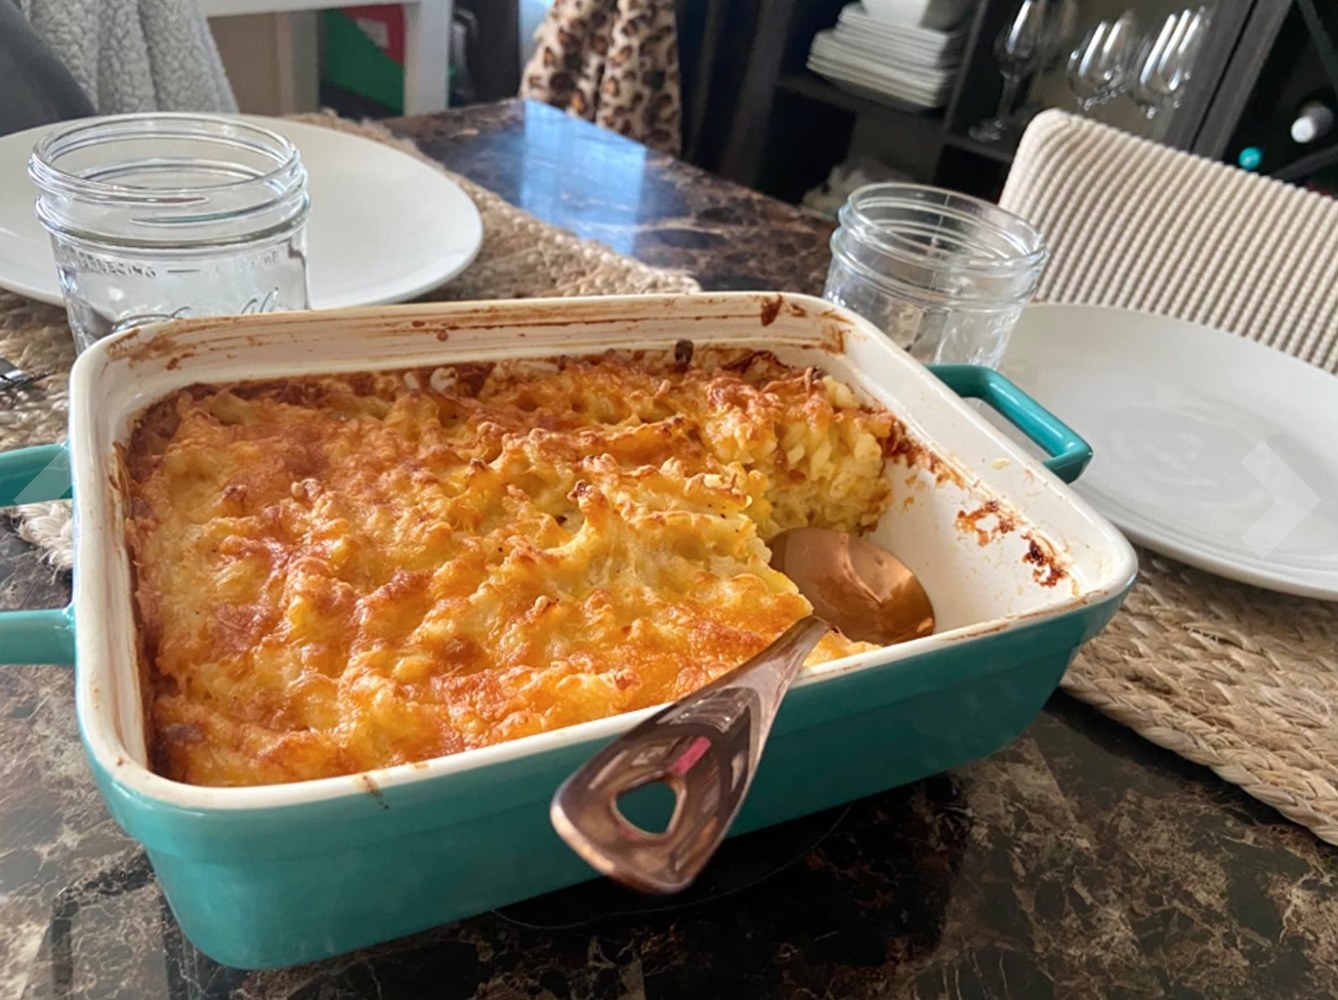 A piece of the three-piece bakeware set in aqua holding a lasagna